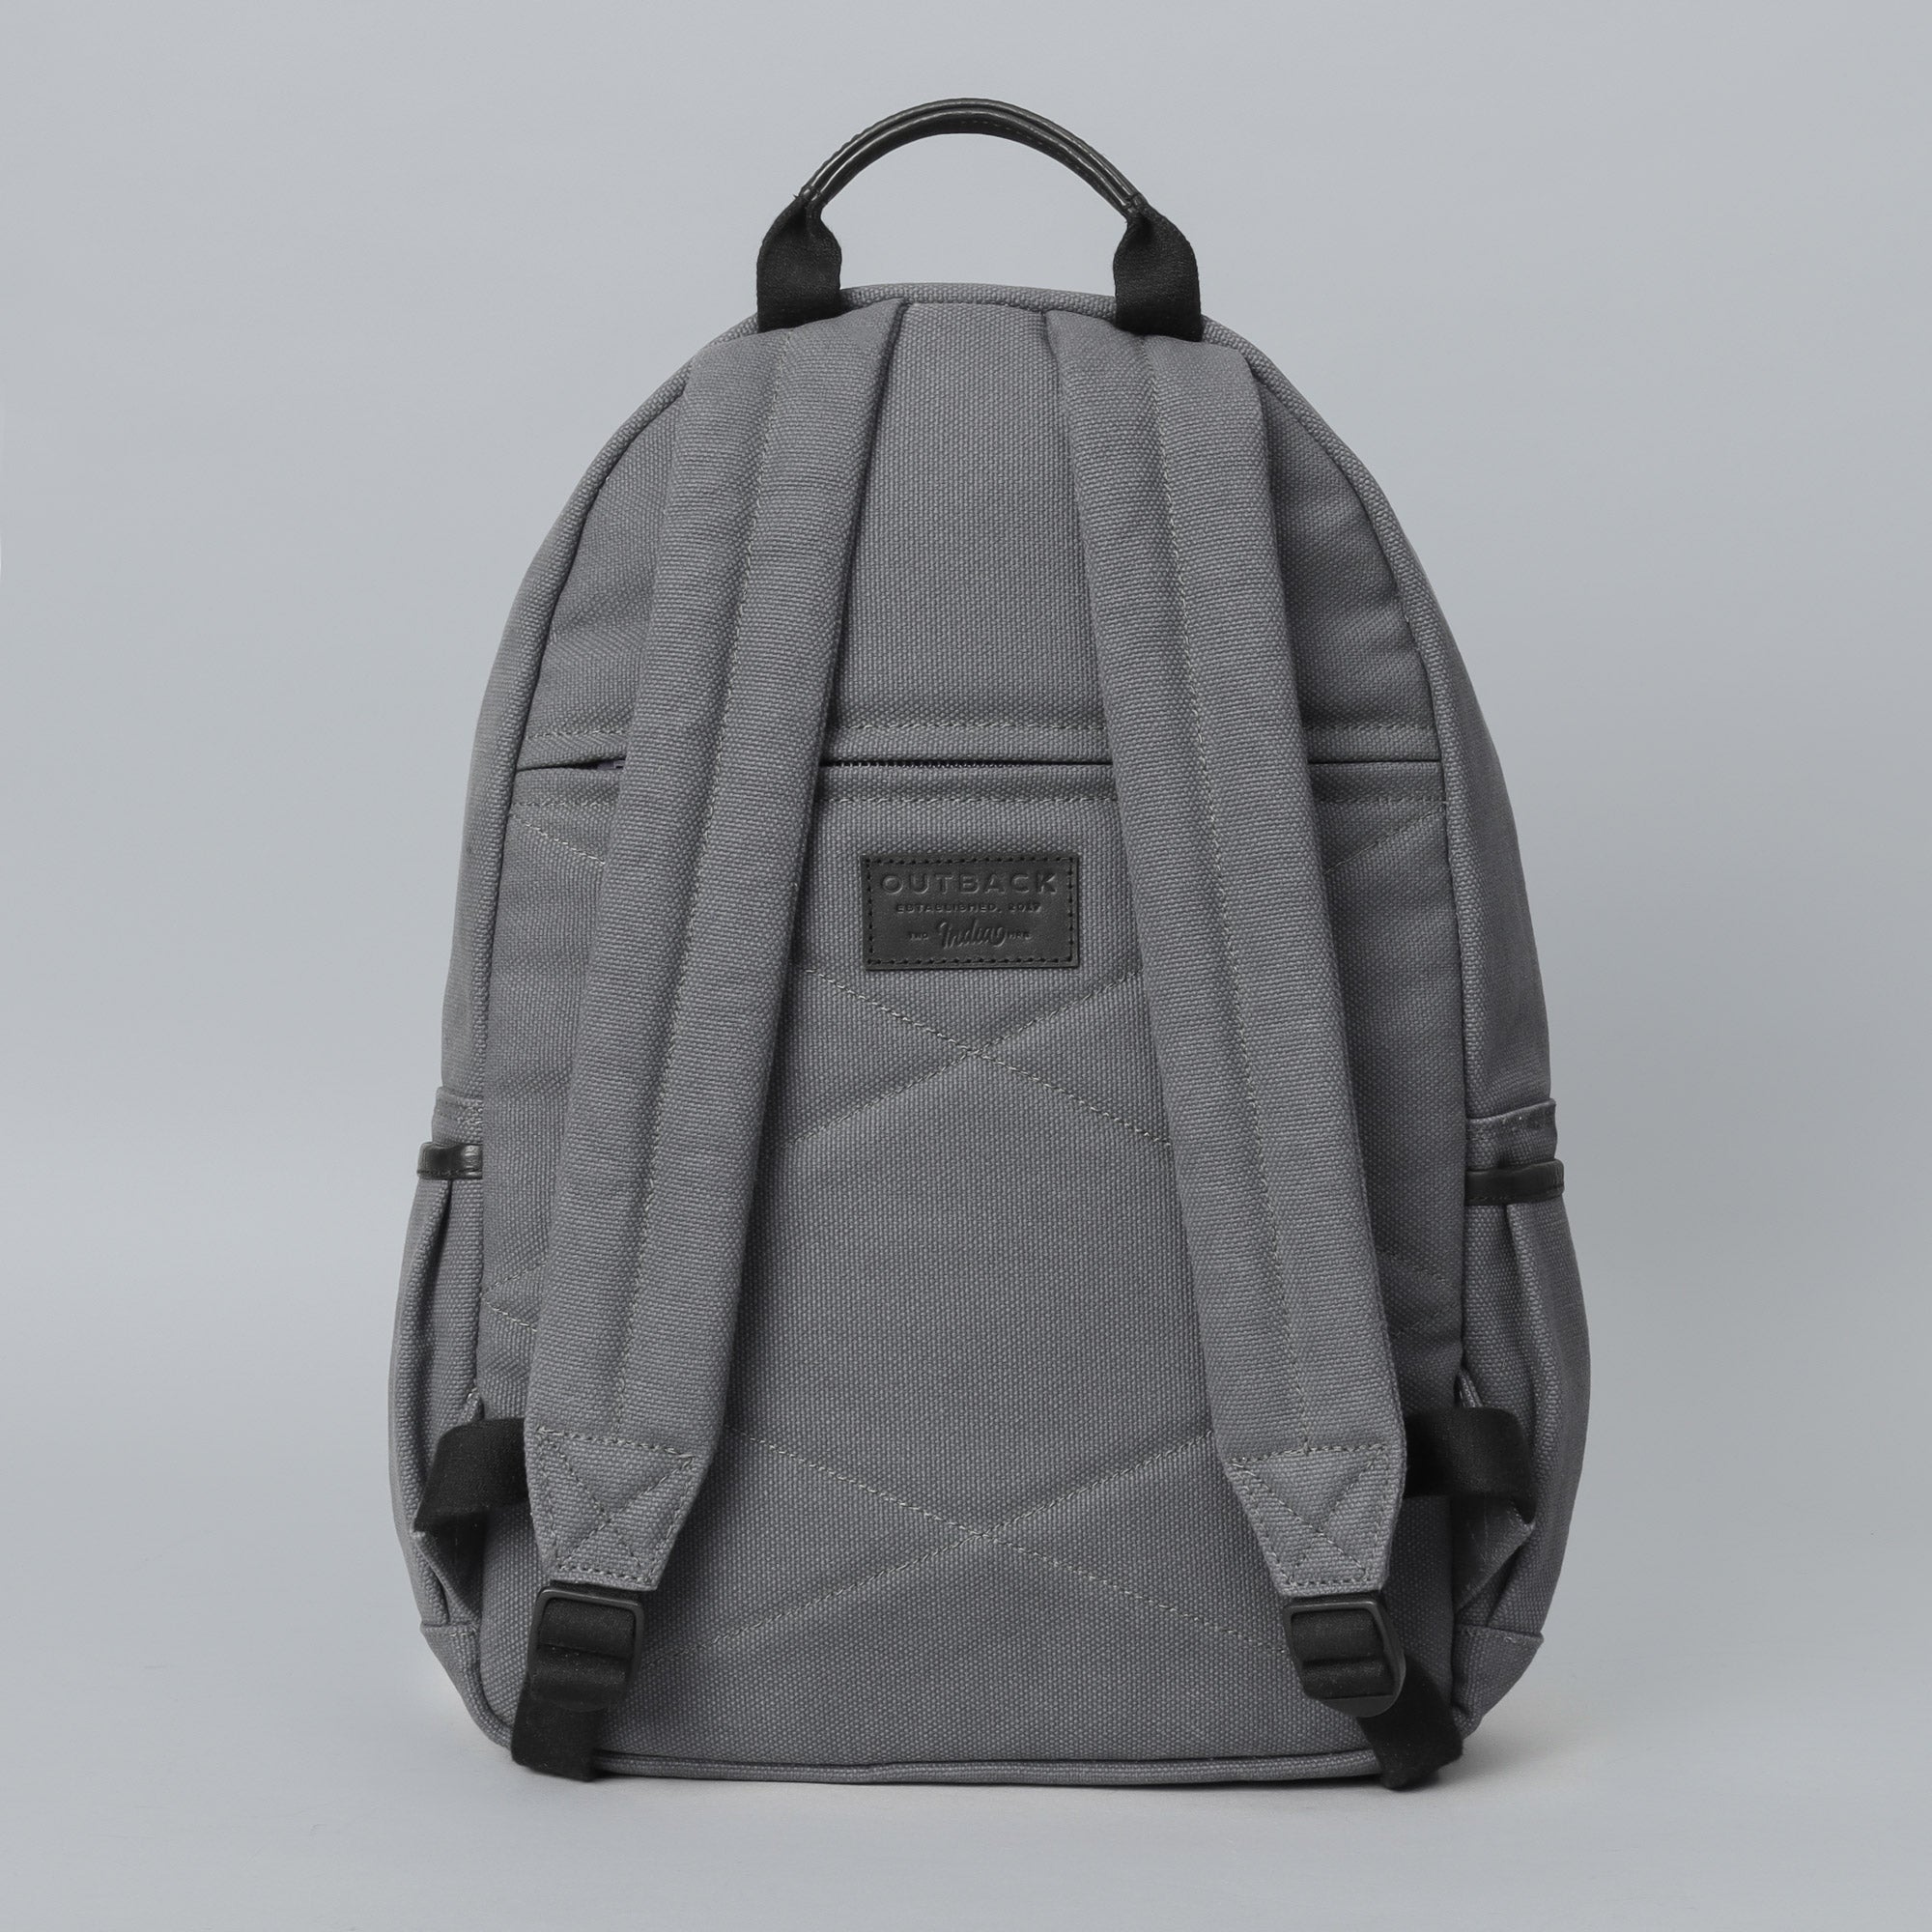 grey canvas hiking backpack